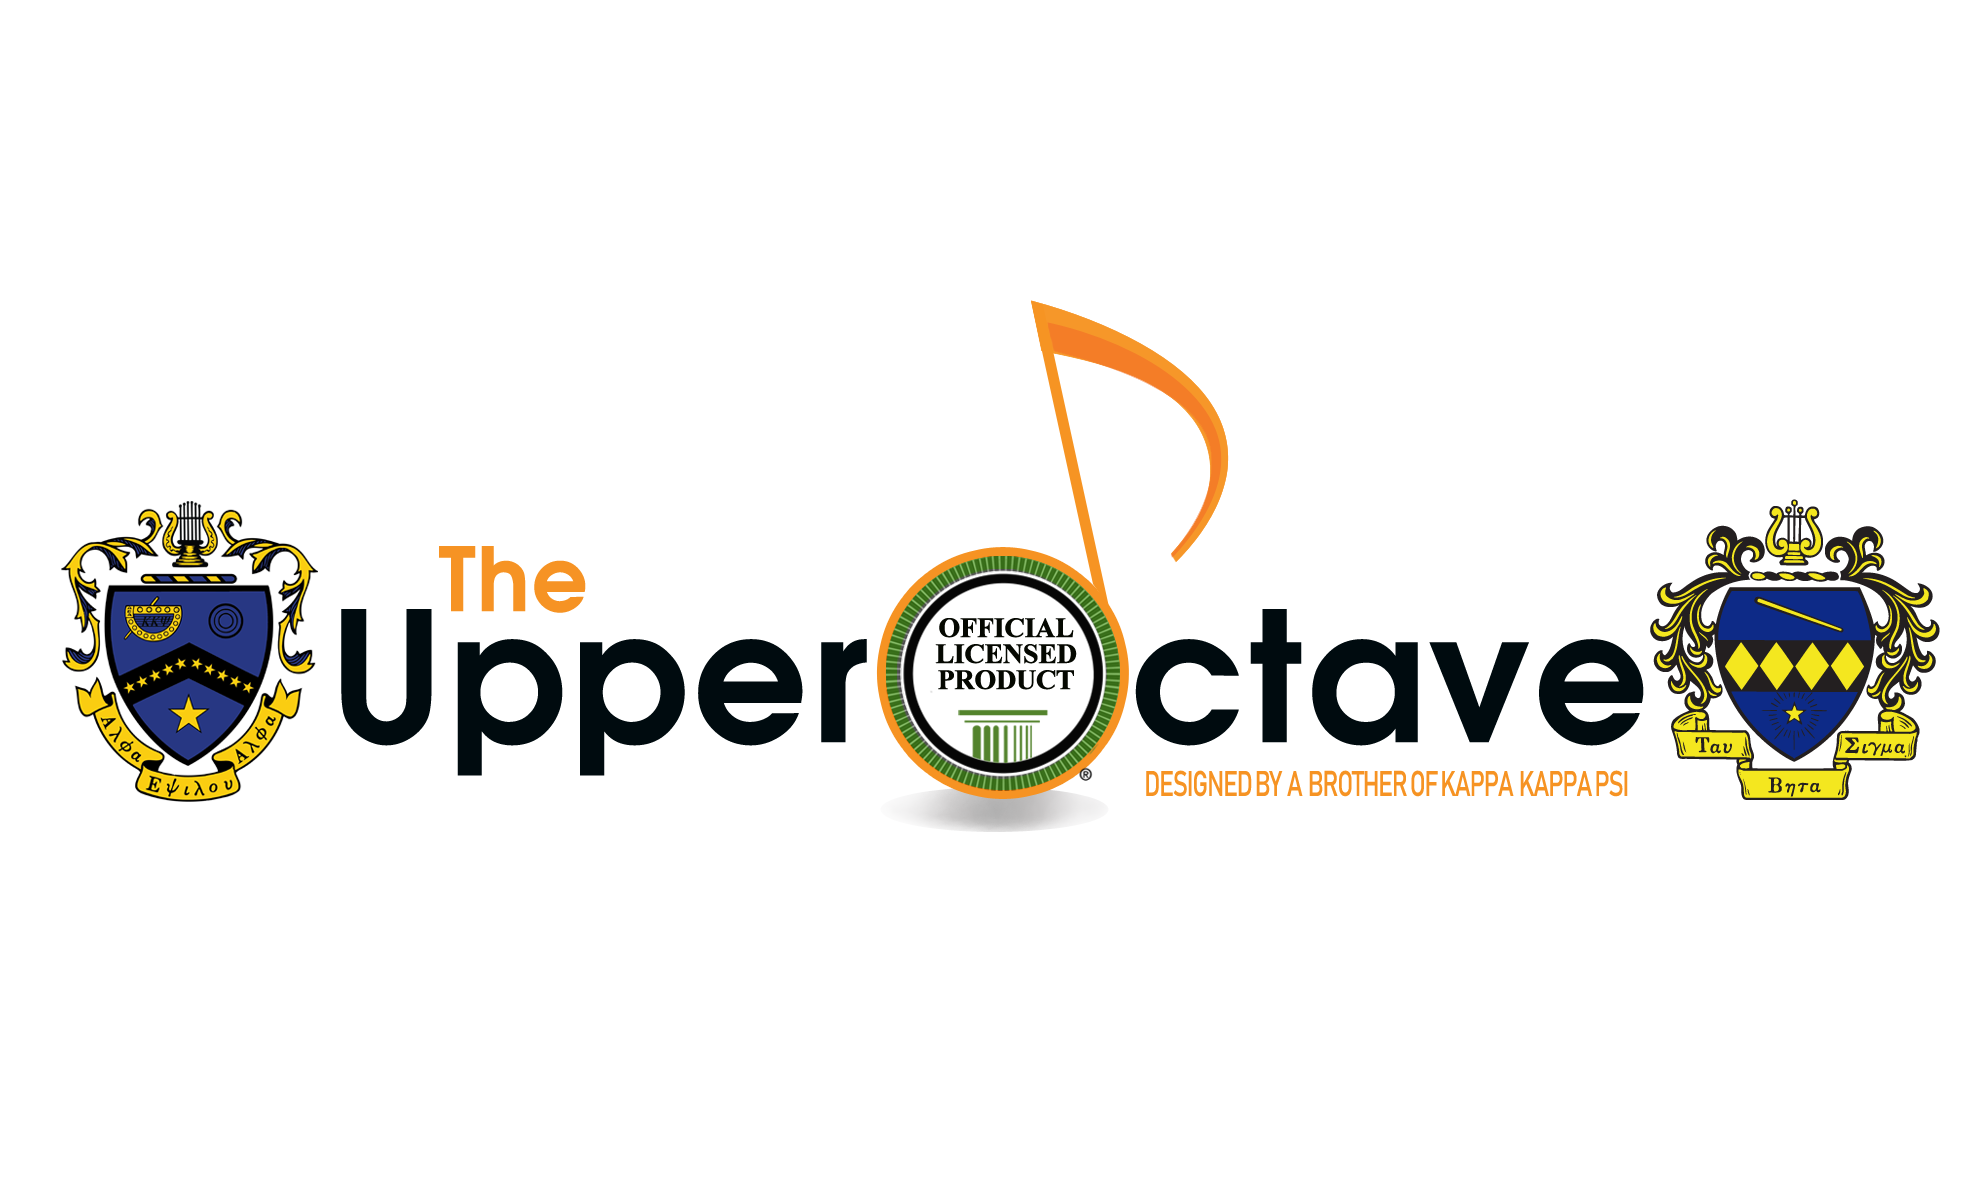 The Upper Octave